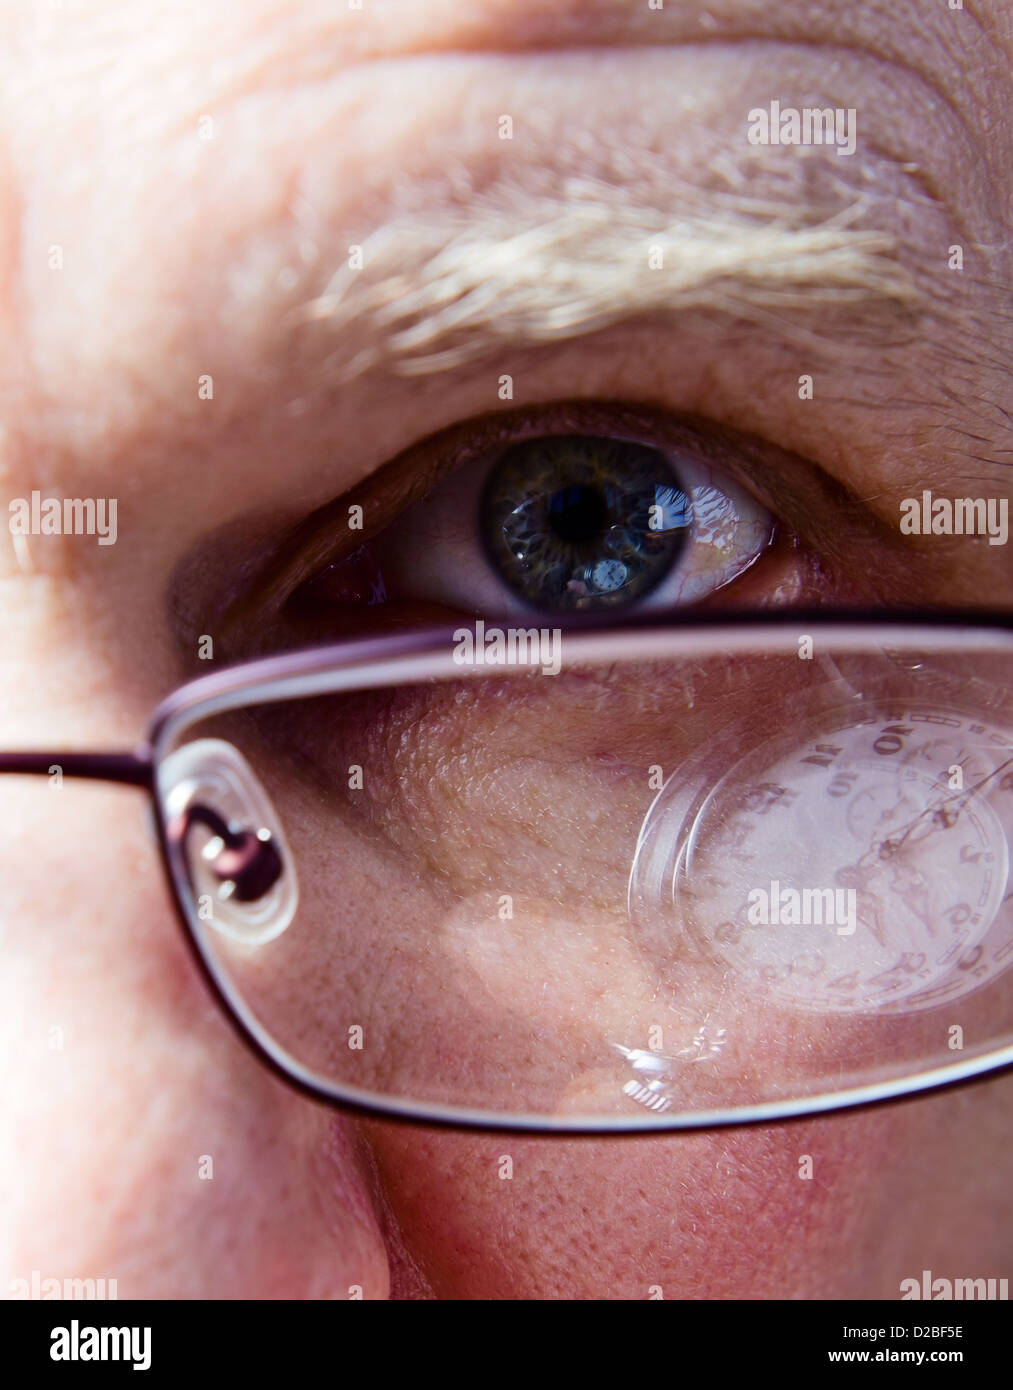 Eye of the businessman, natural reflexion in eyes and glasses Stock Photo